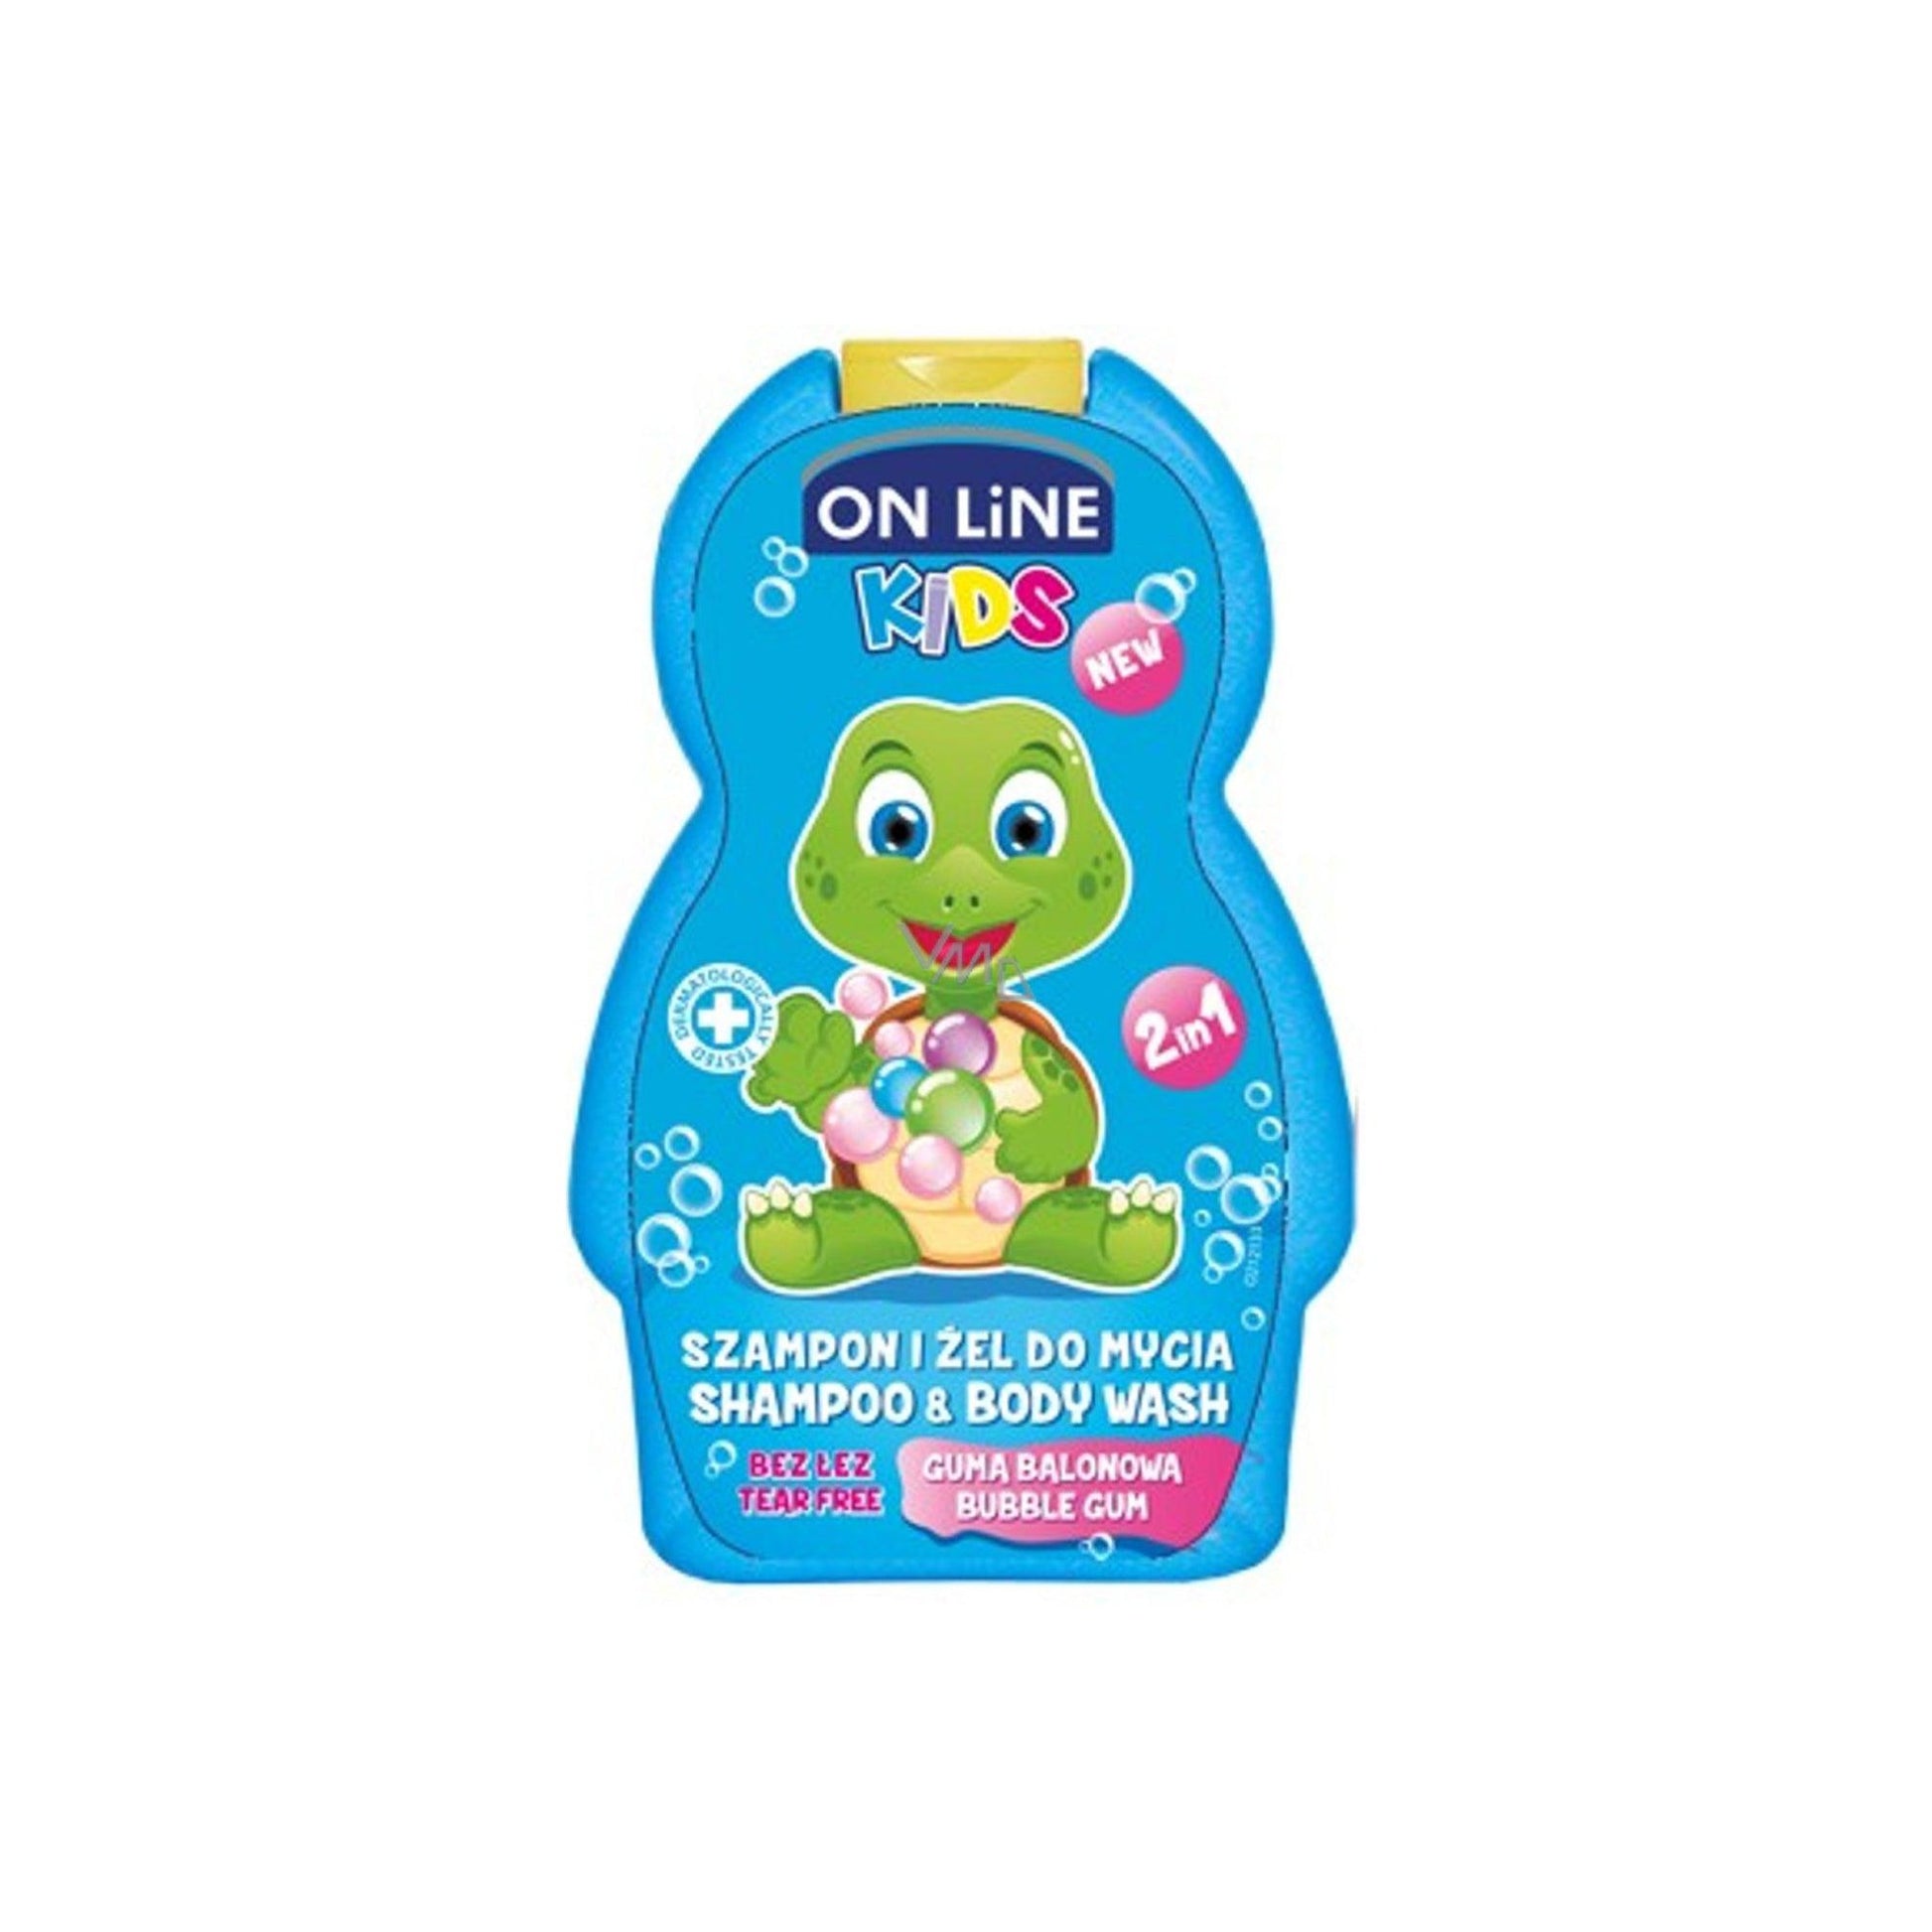 On Line 2 In1 Kids Shampoo And Body Wash With Bubble Gum - Beauty Bounty